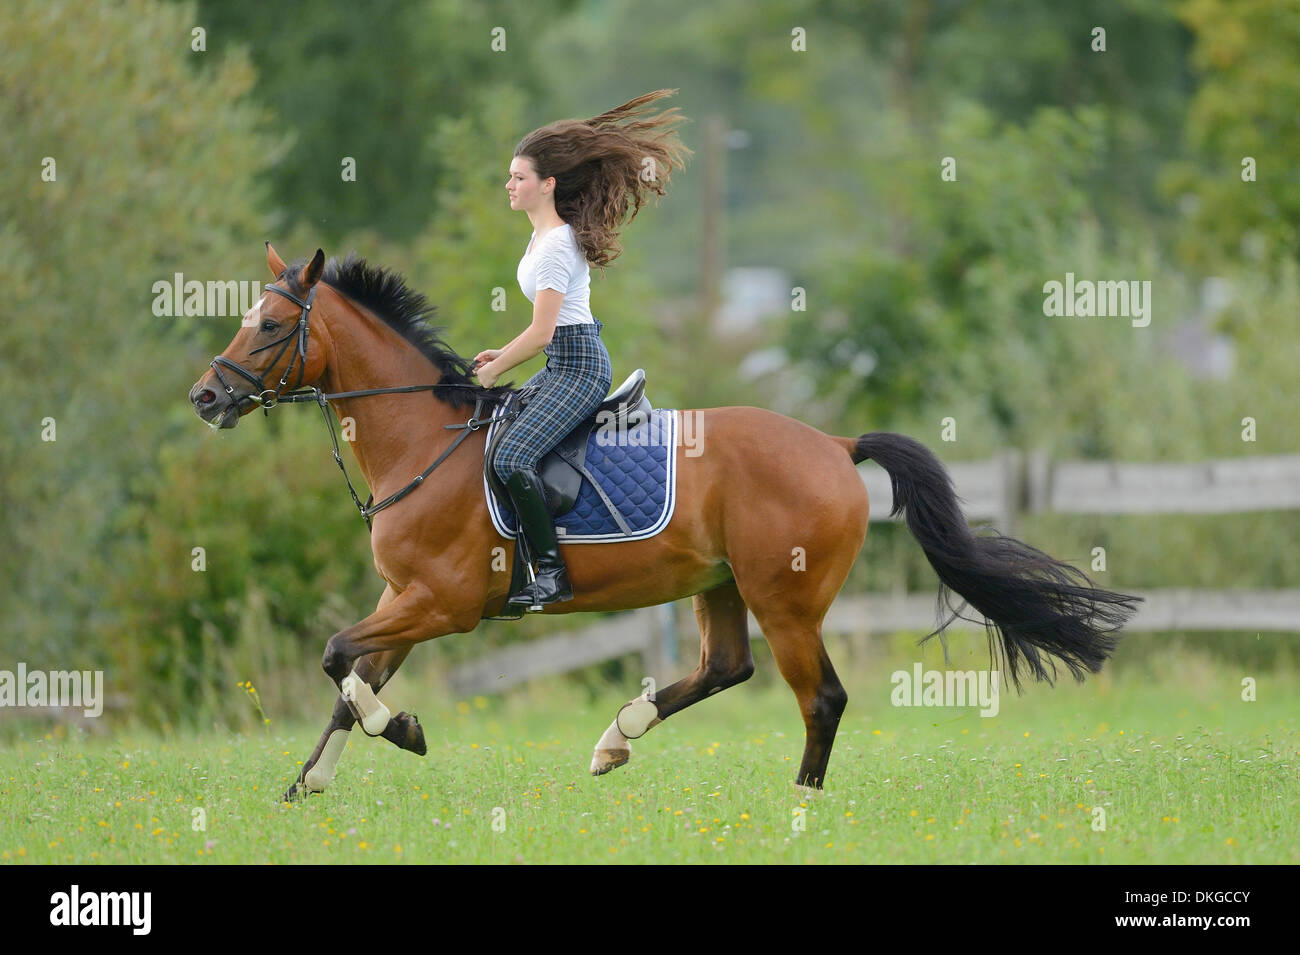 Teenage girl riding a Mecklenburger horse on a paddock Stock Photo